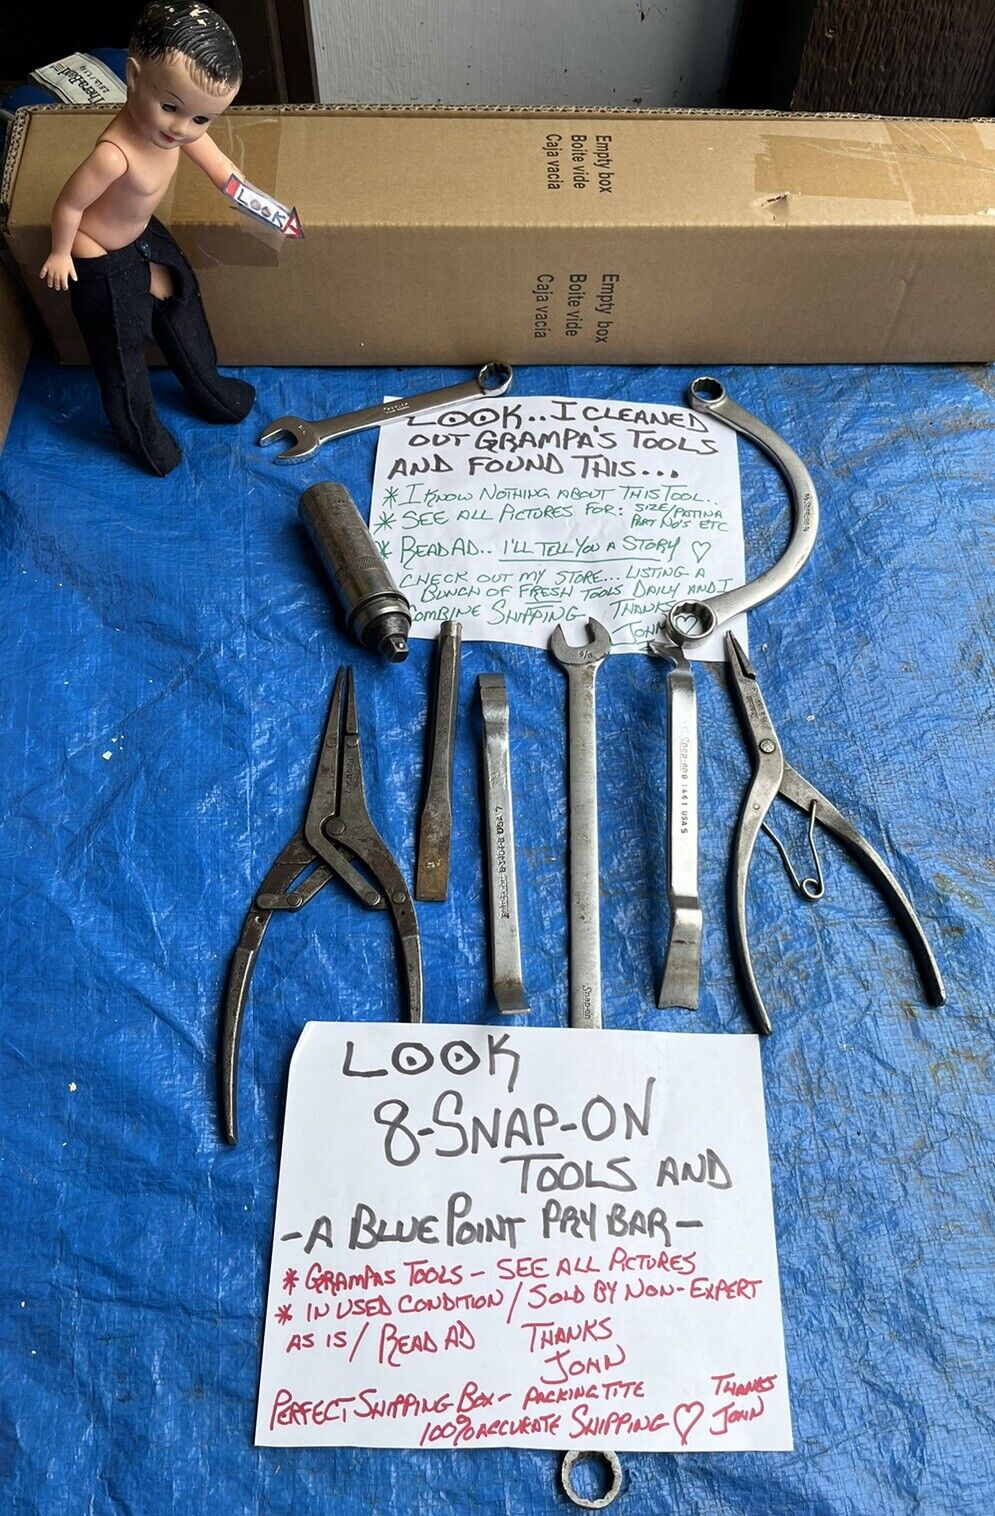 Vintage Lot Grandpa’s Snap On Mechanics Tools + Blue Point Wrenches +8 Pieces